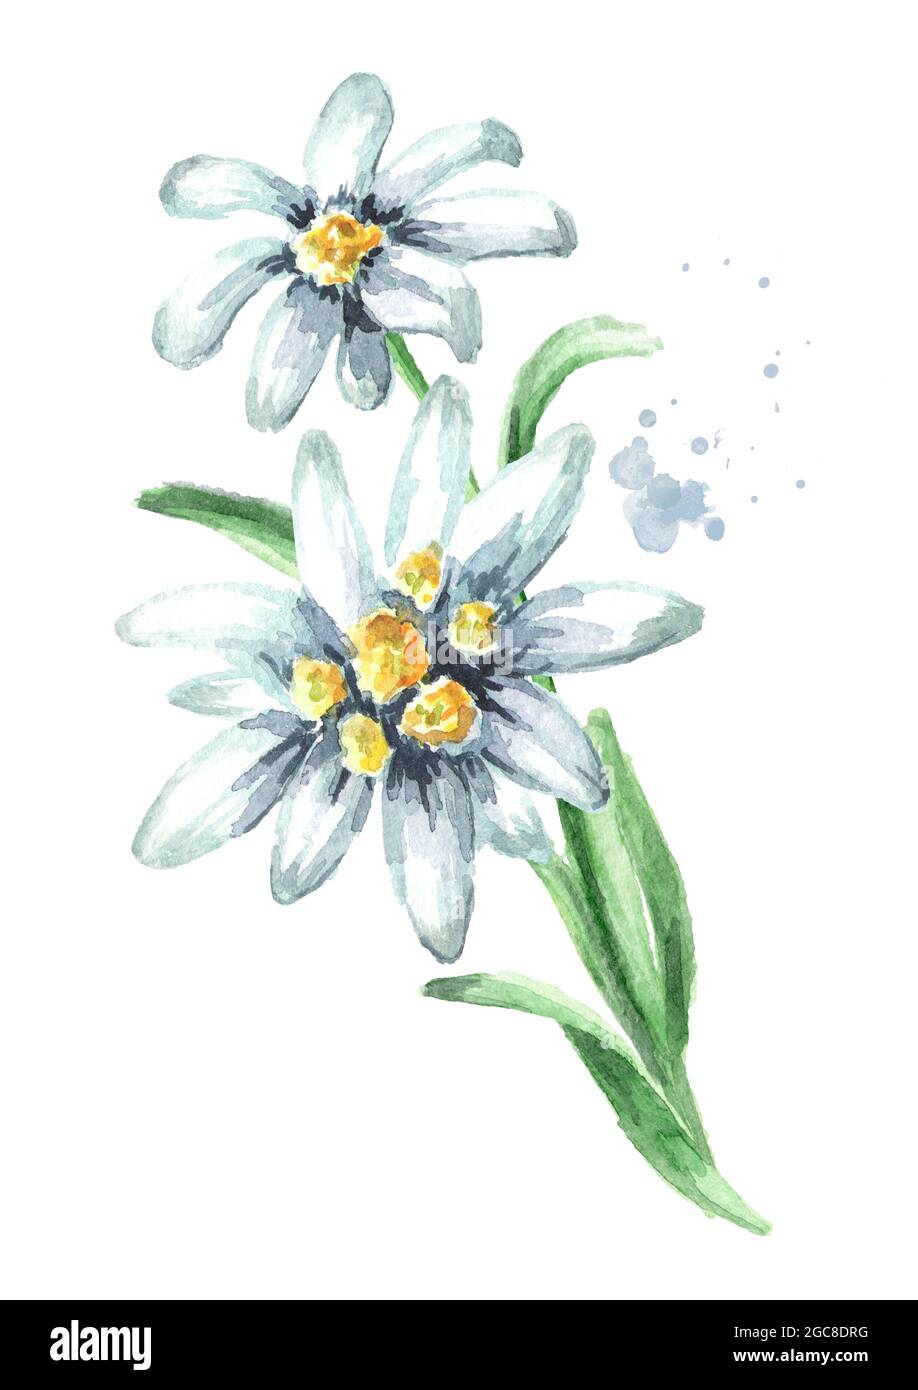 Edelweiss flower (Leontopodium alpinum) with leaves Watercolor hand drawn illustration, isolated on white background Stock Photo